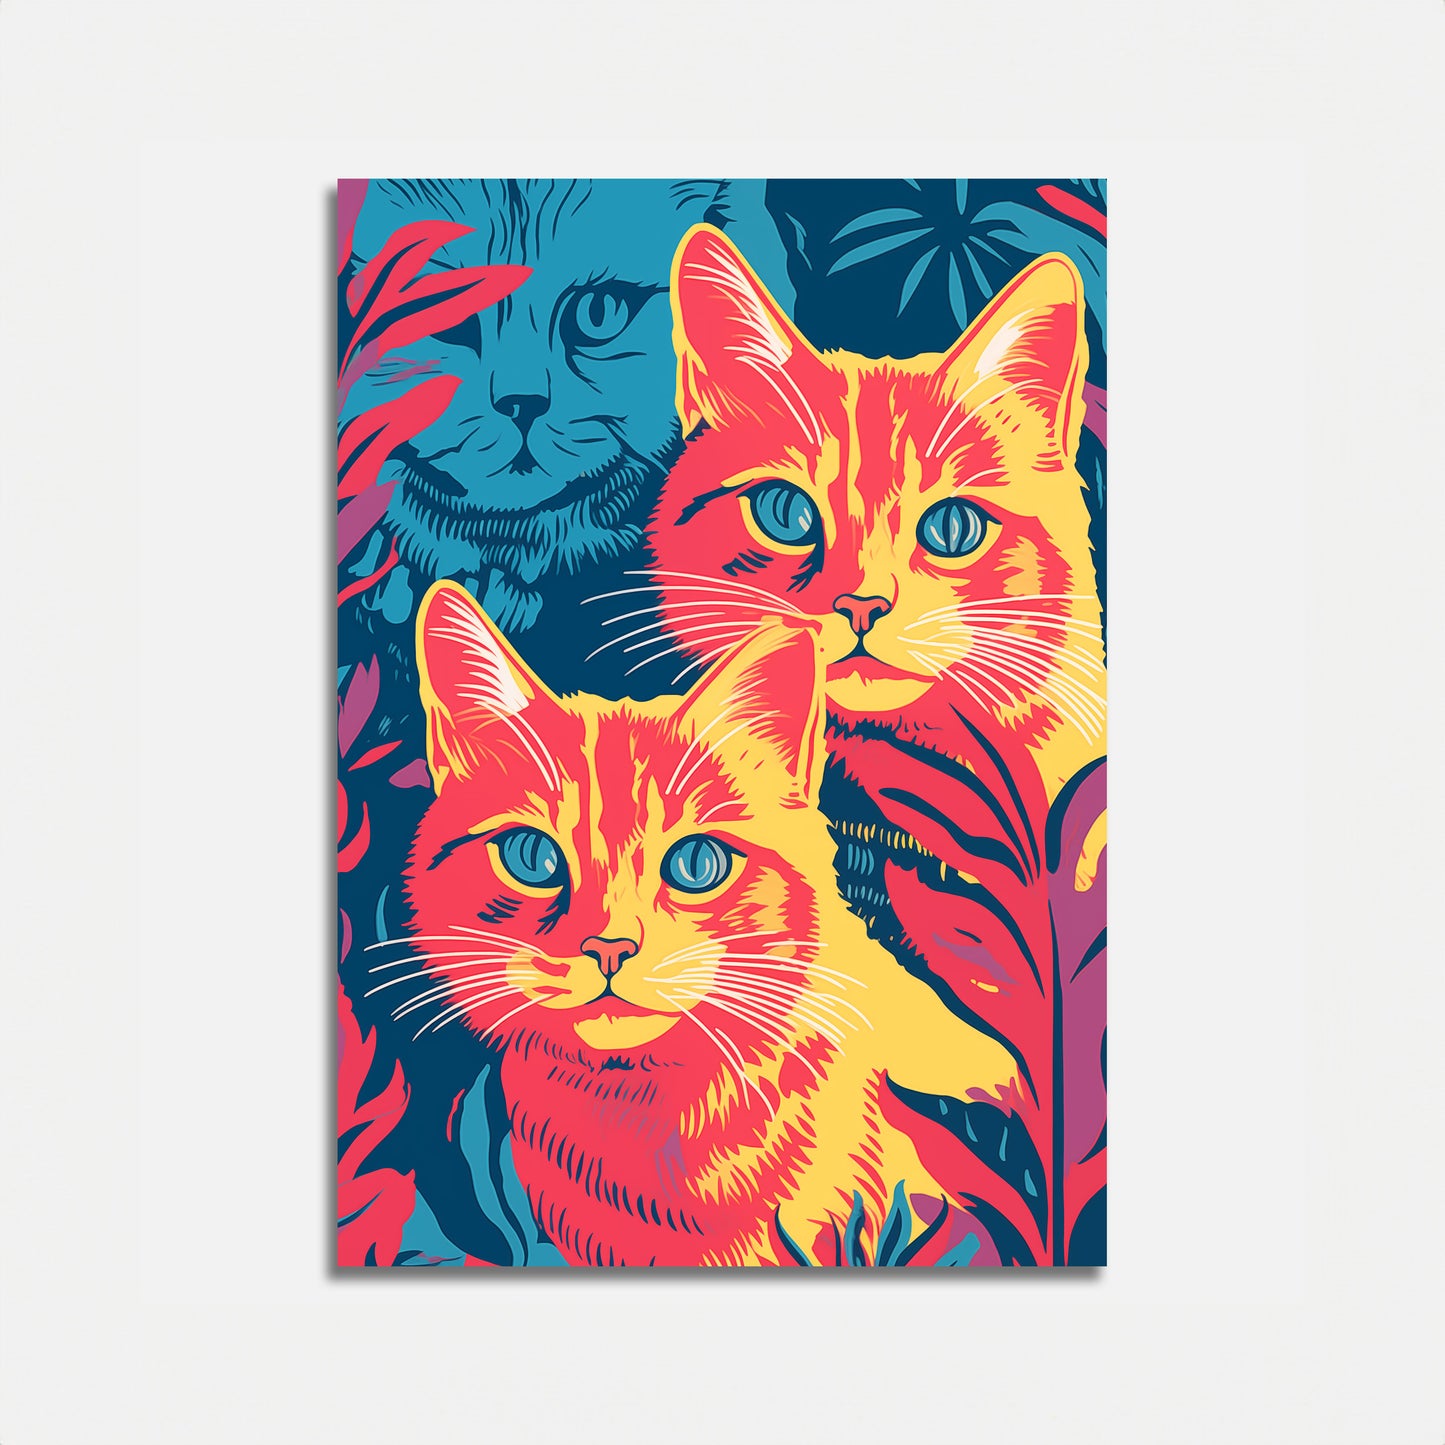 Colorful illustration of three cats with vibrant blue and red foliage background.